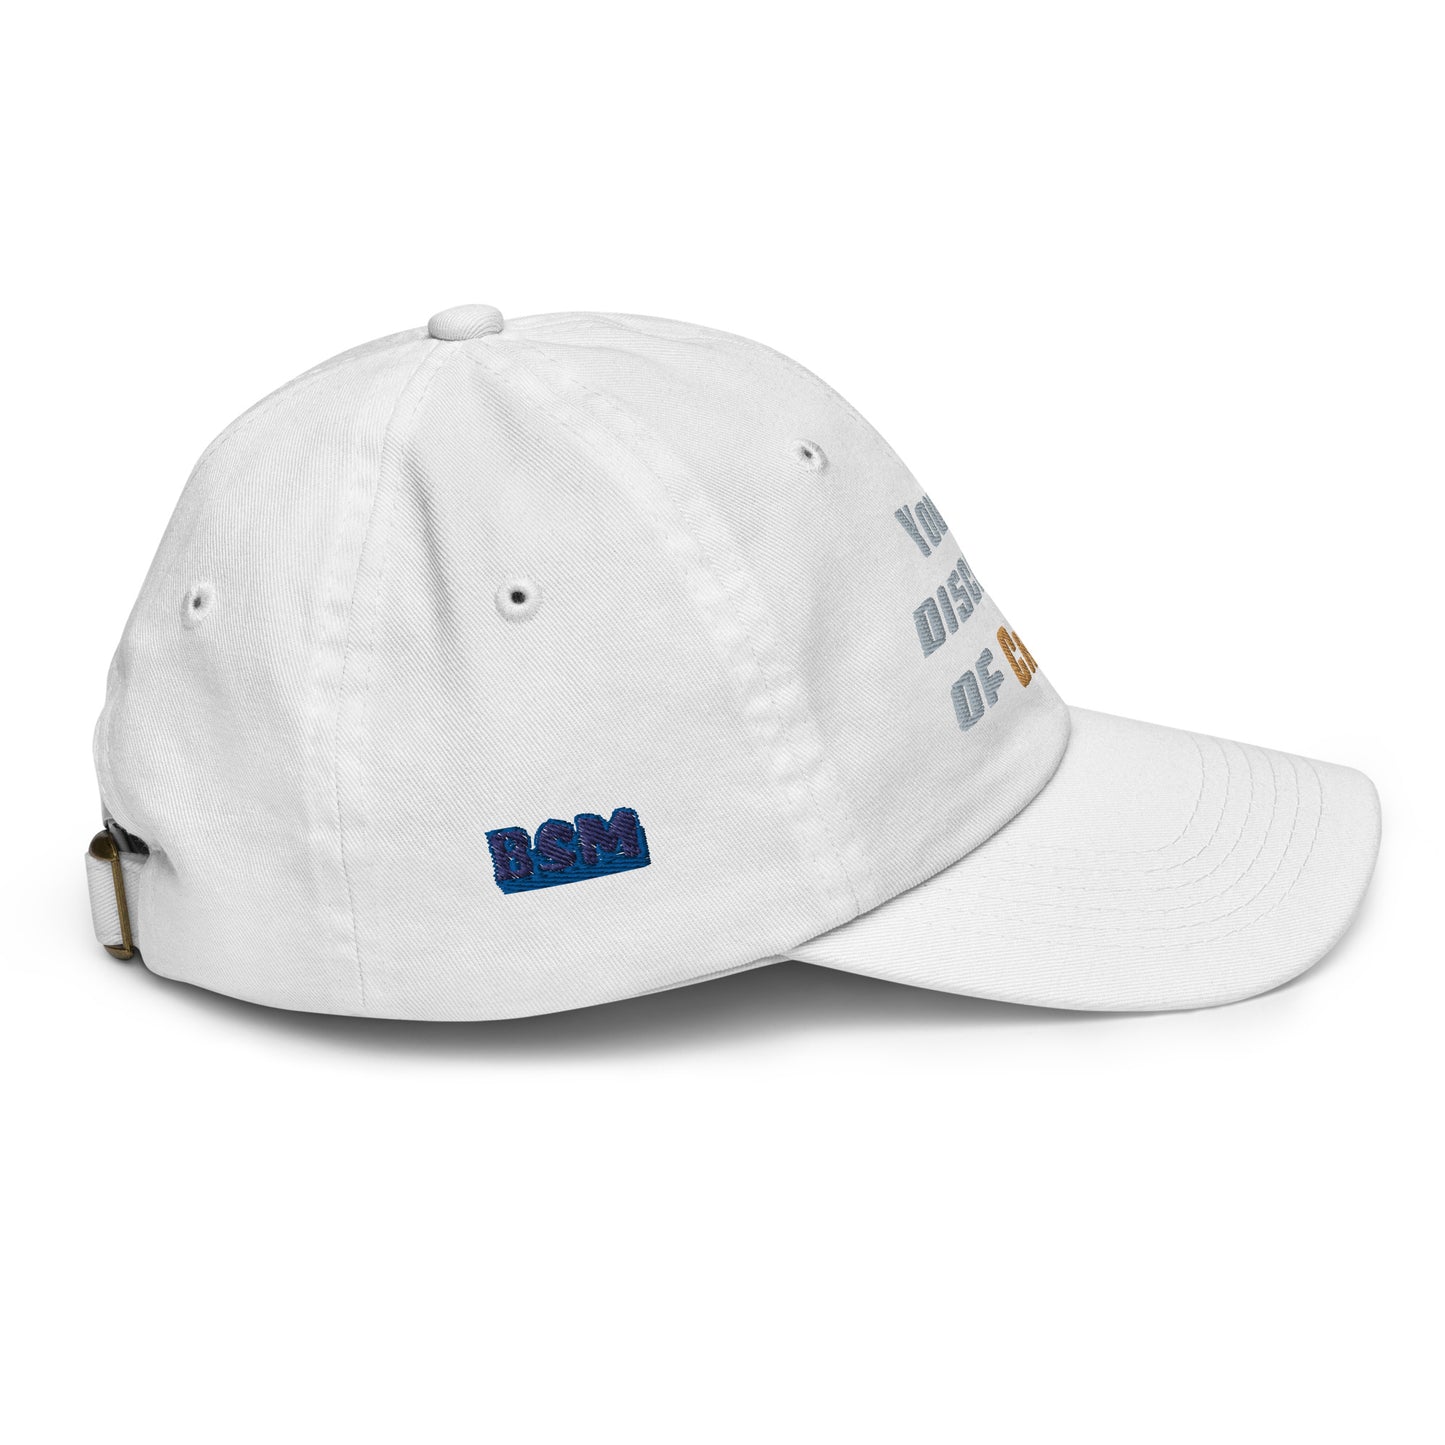 Young Disciples of Christ Youth Baseball Cap